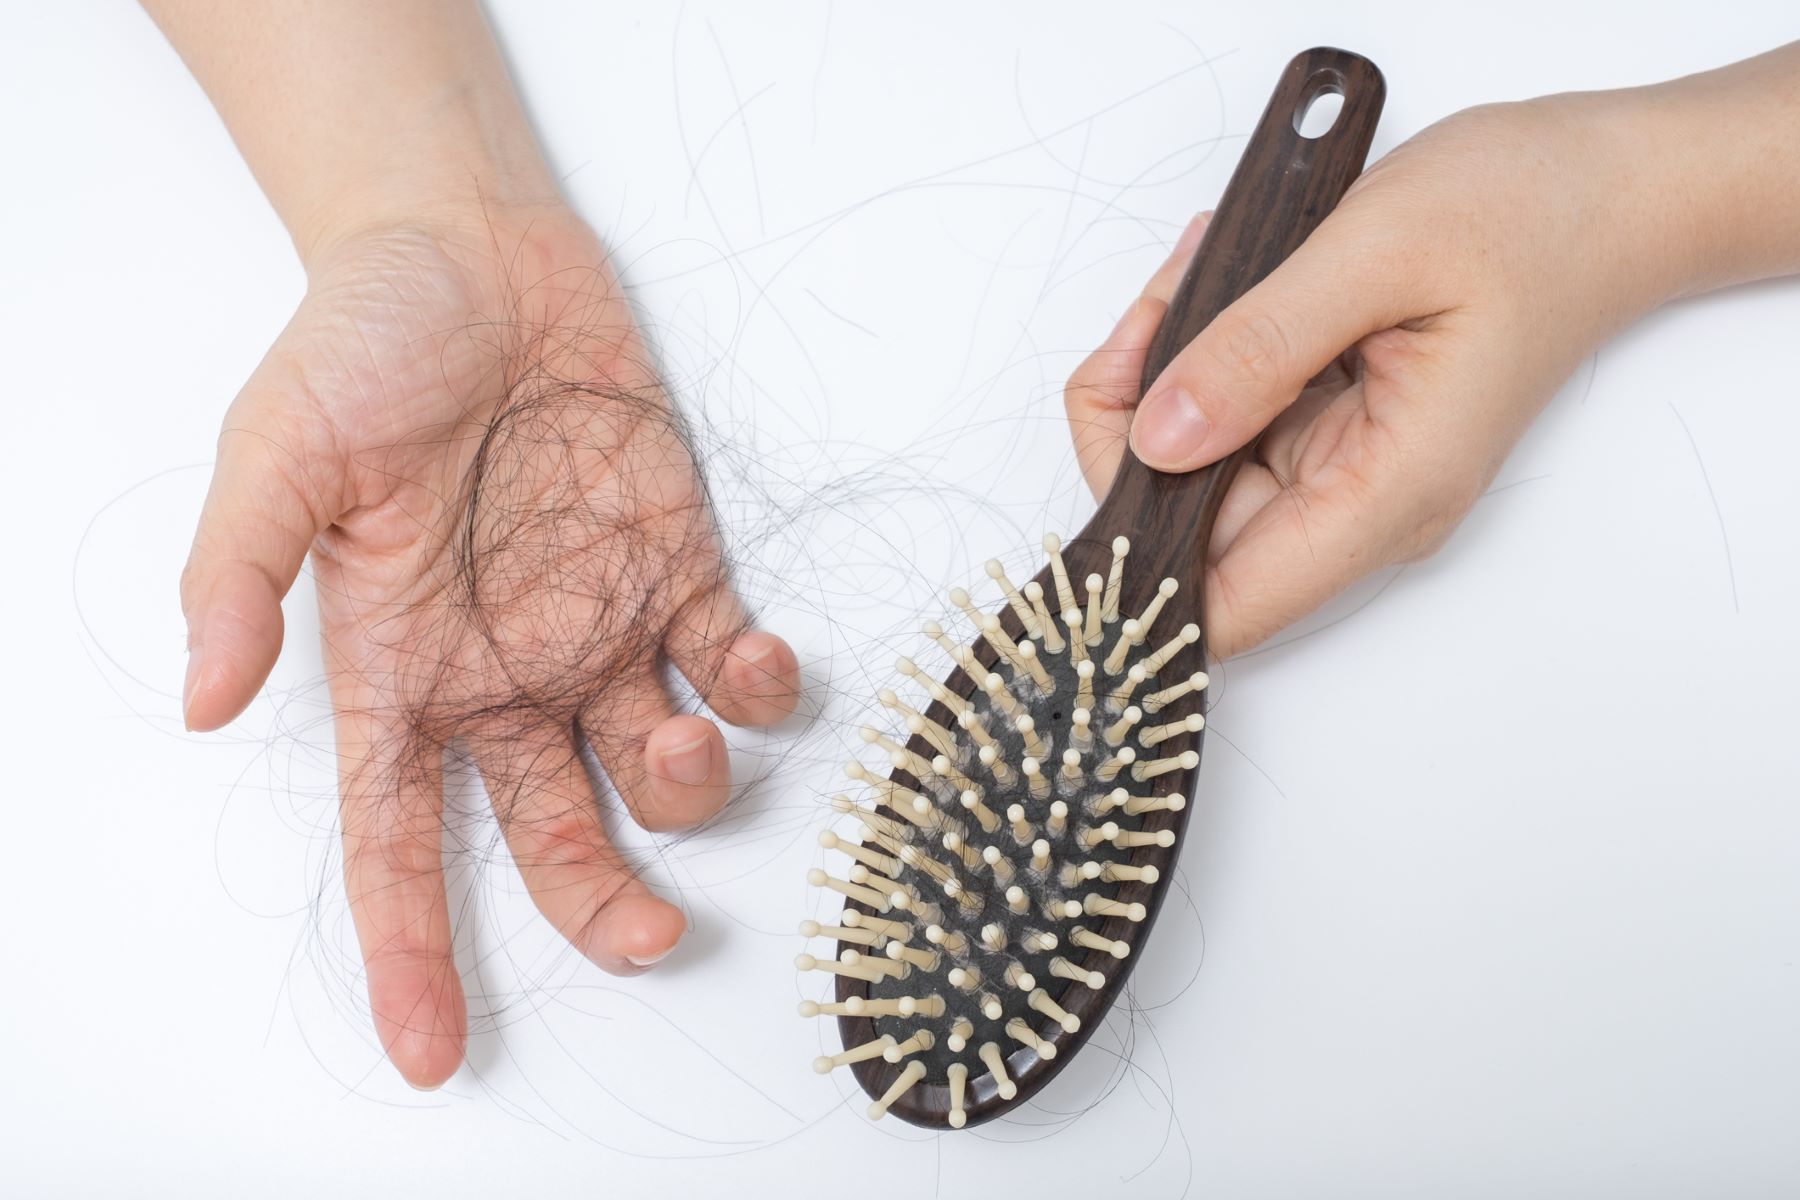 a hand showing fallen hair removed from a hairbrush